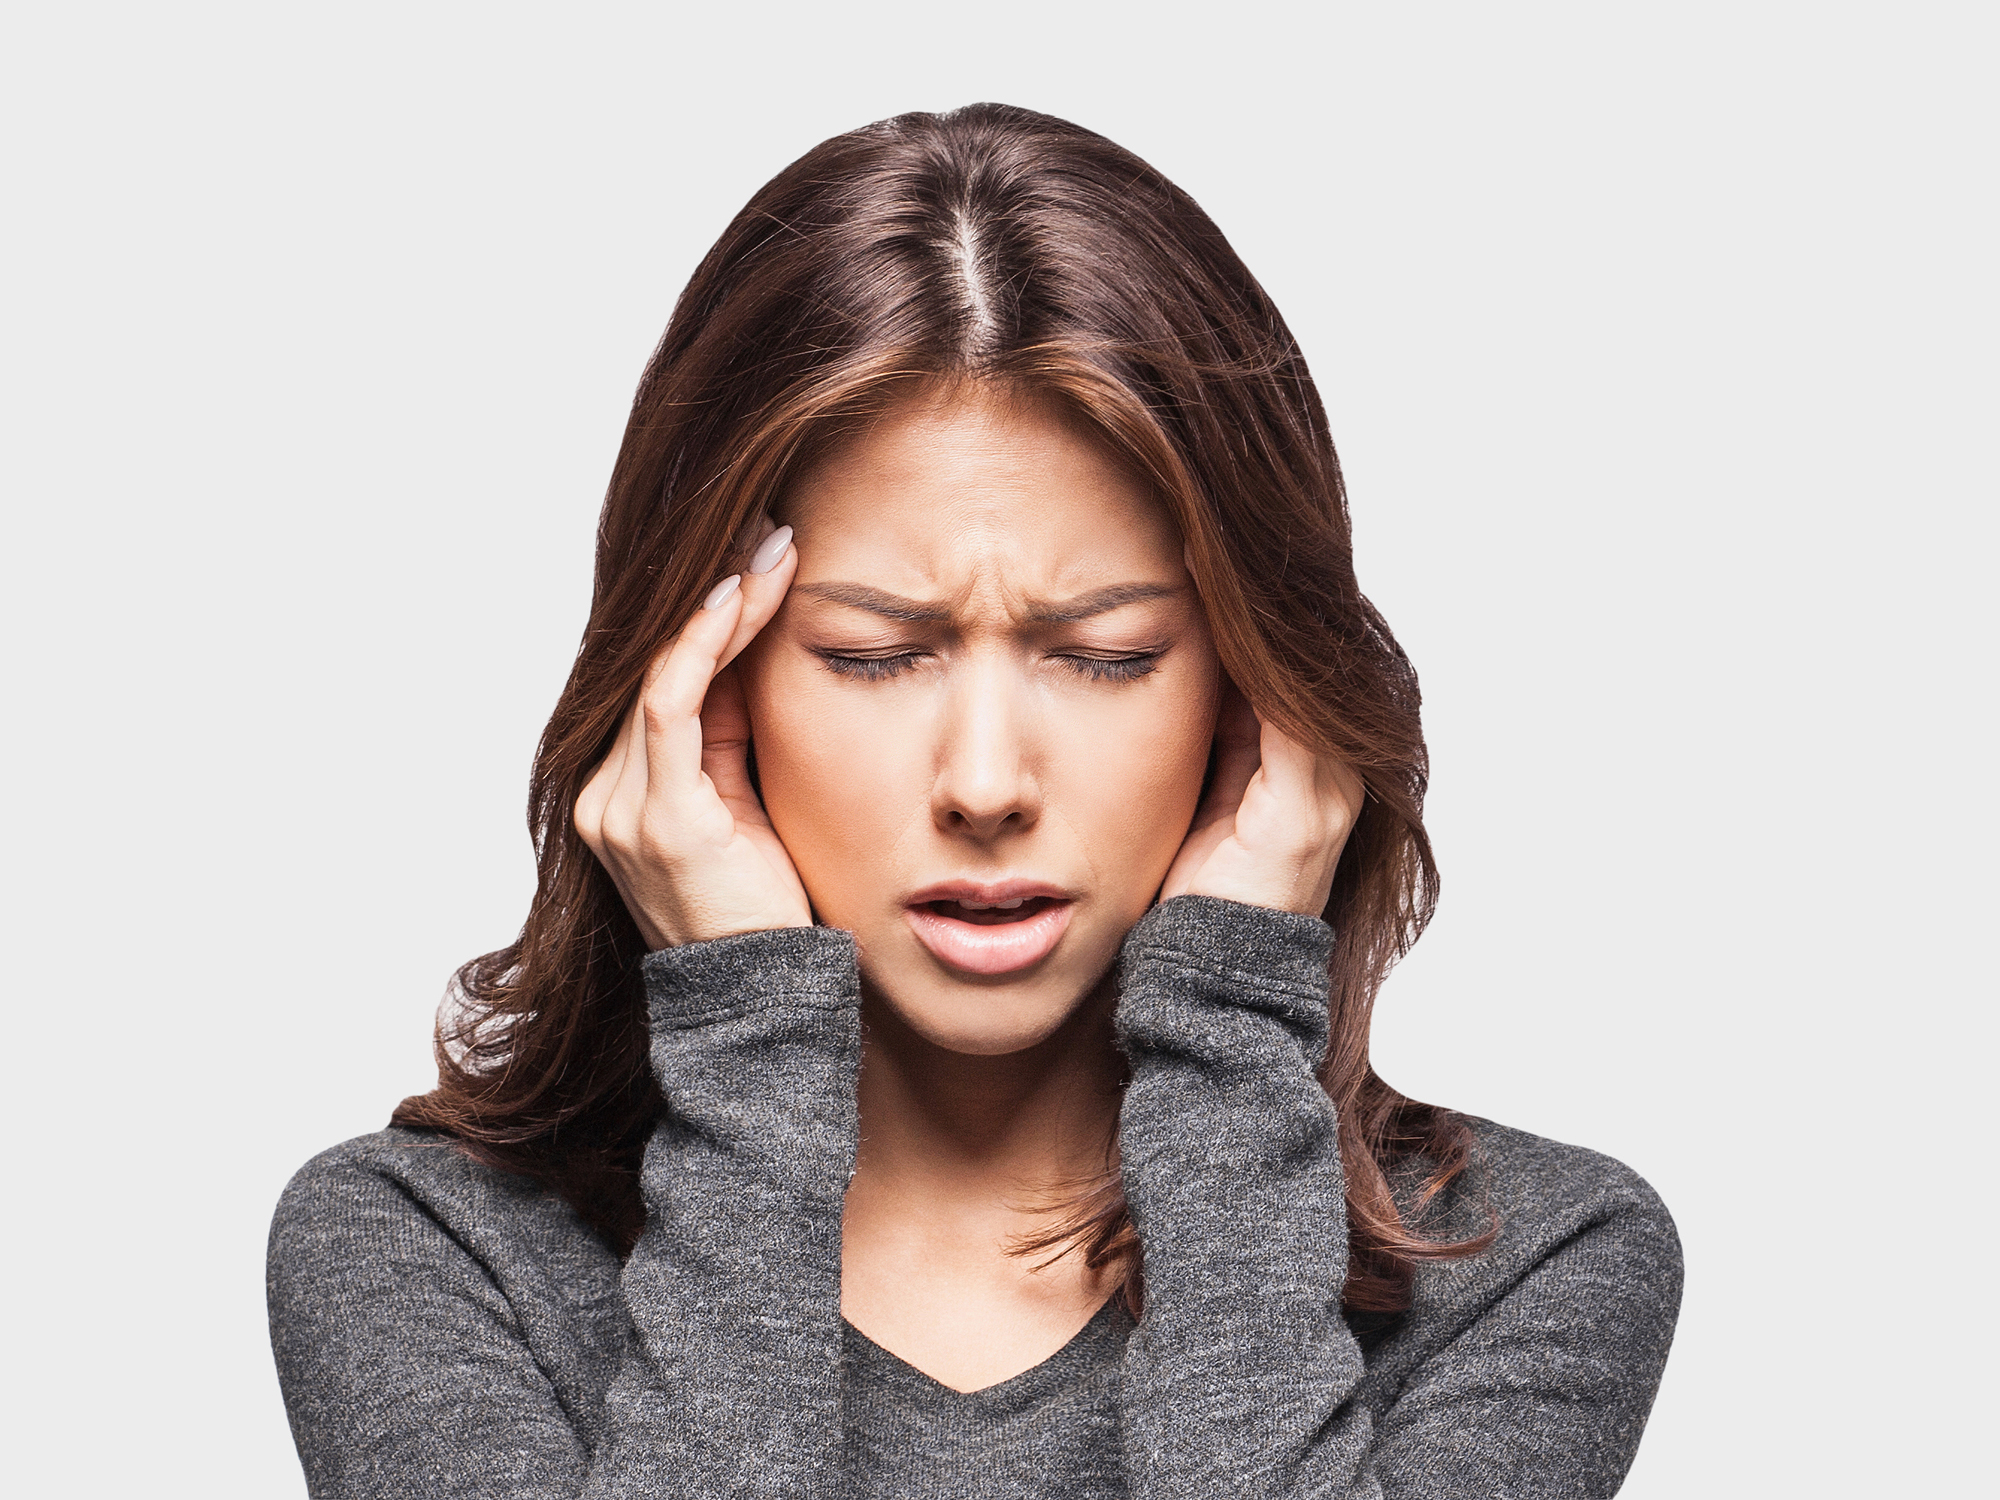 6 foods that can trigger a headache from hell